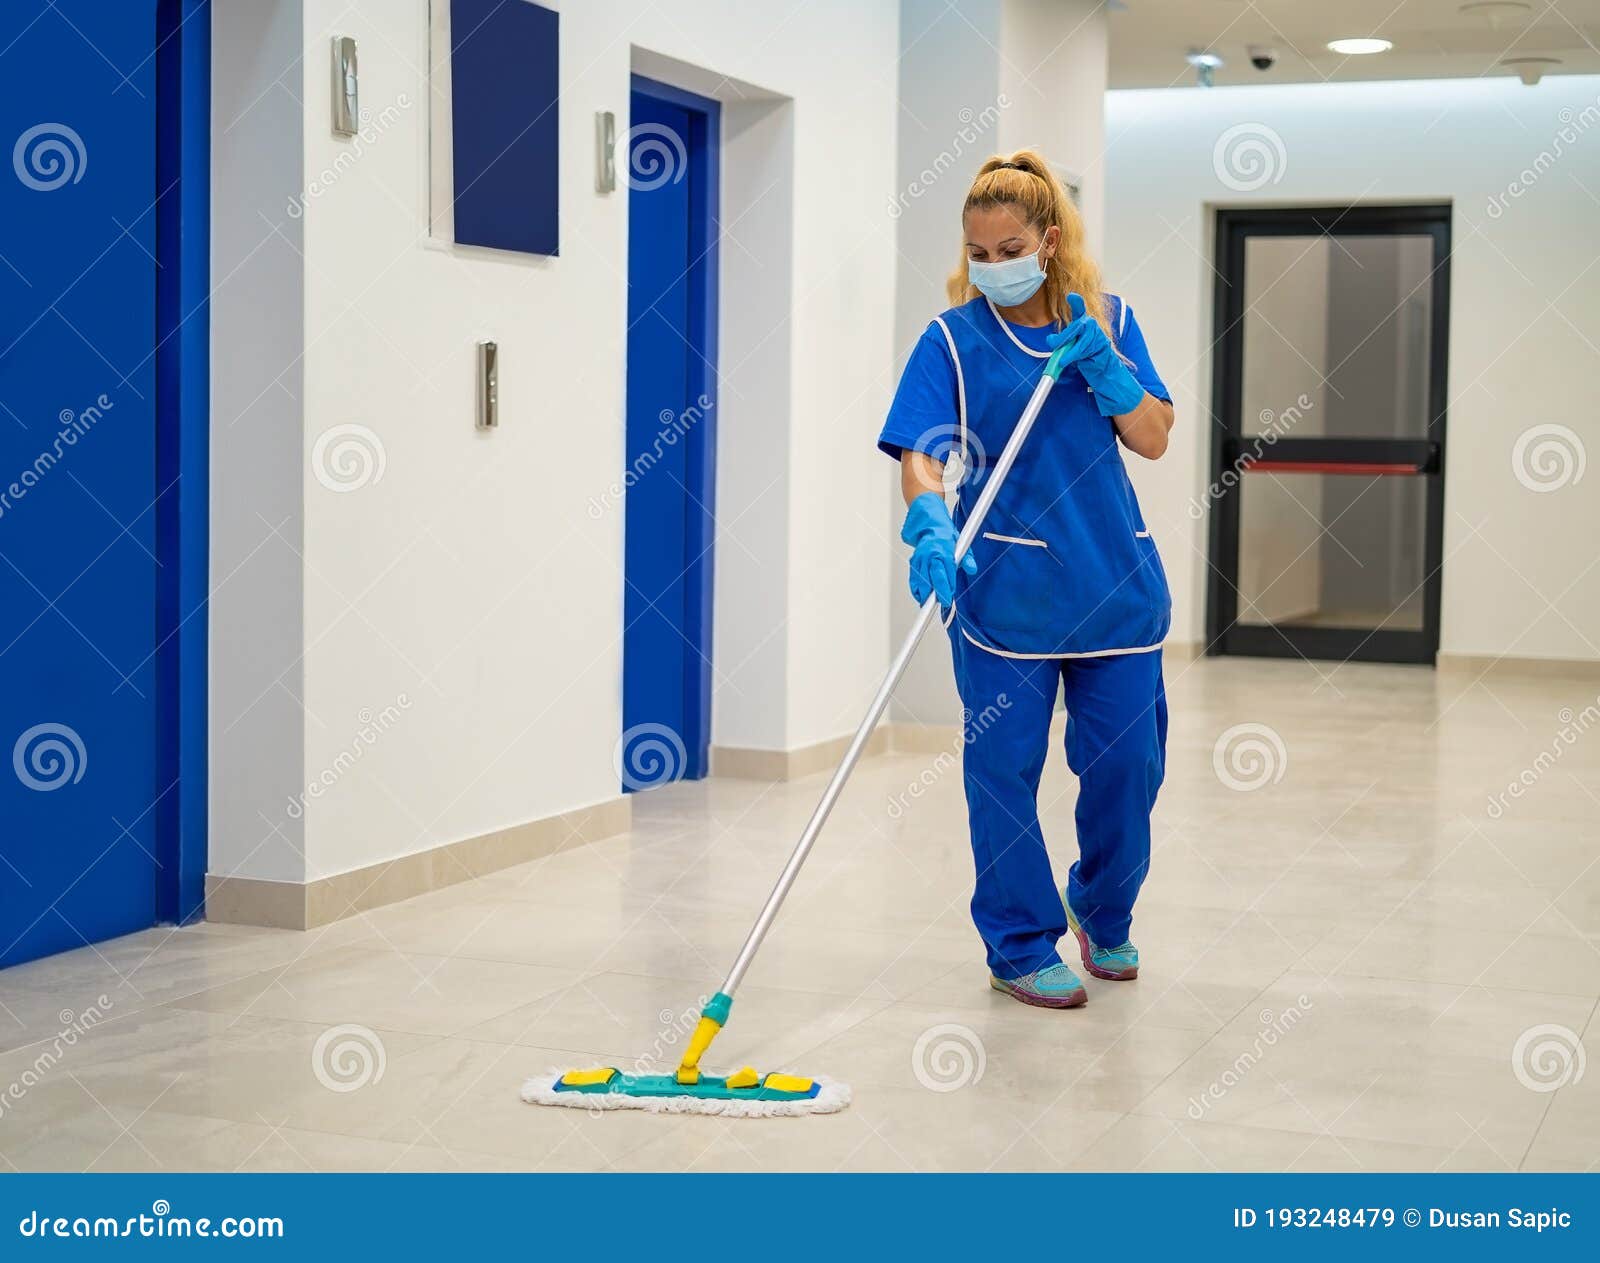 a cleaning lady with a mask on her face cleans the hallway